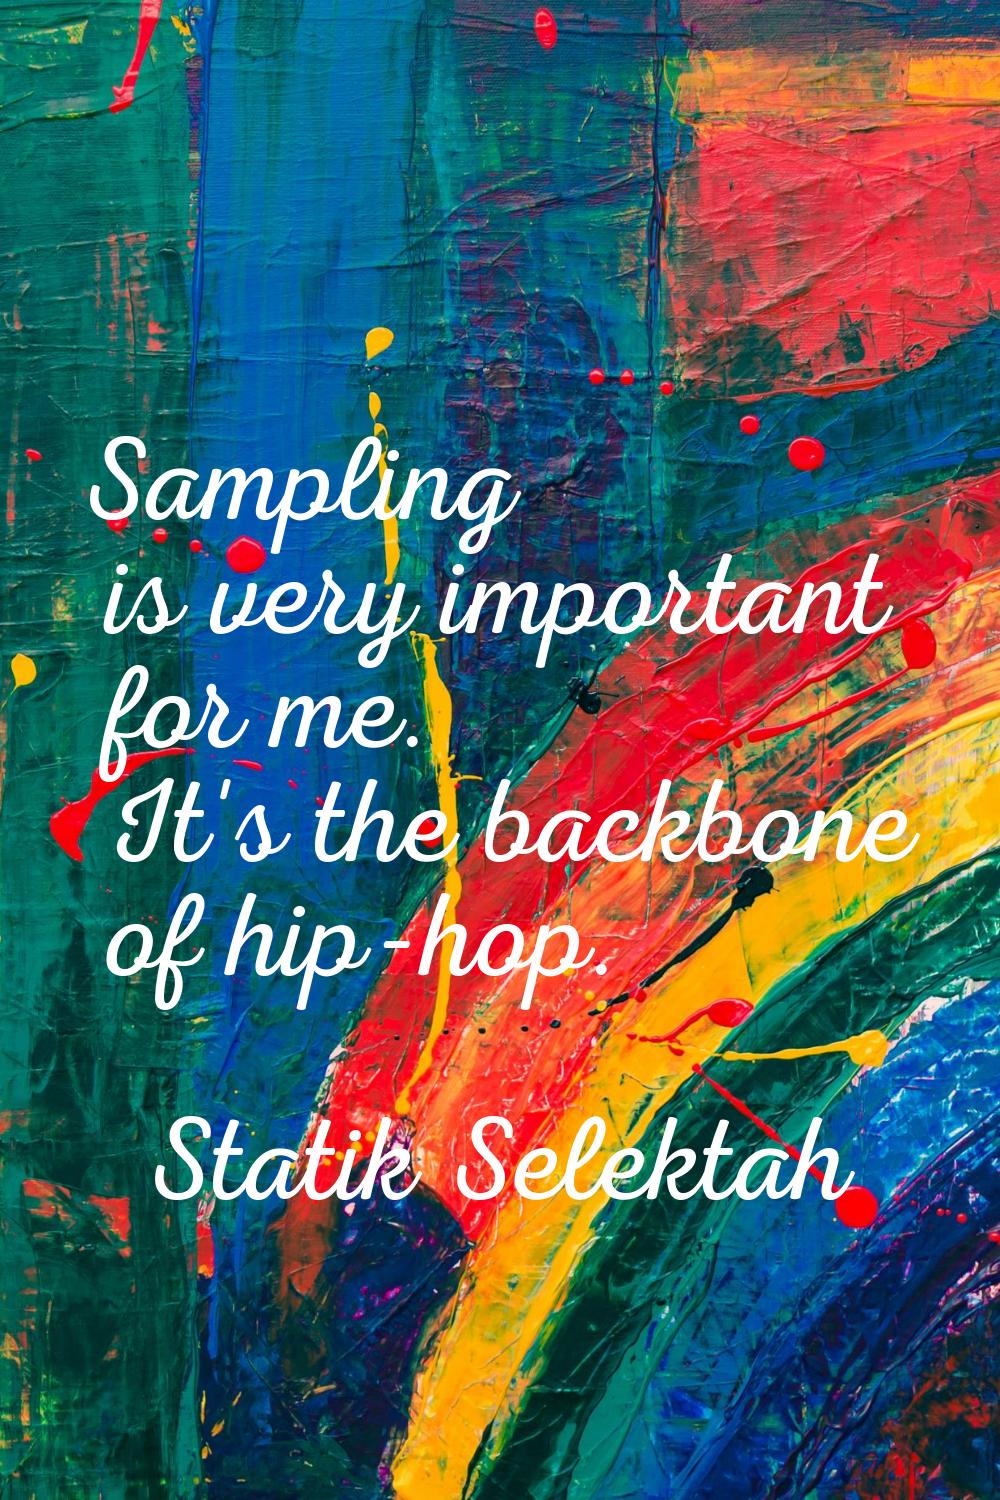 Sampling is very important for me. It's the backbone of hip-hop.